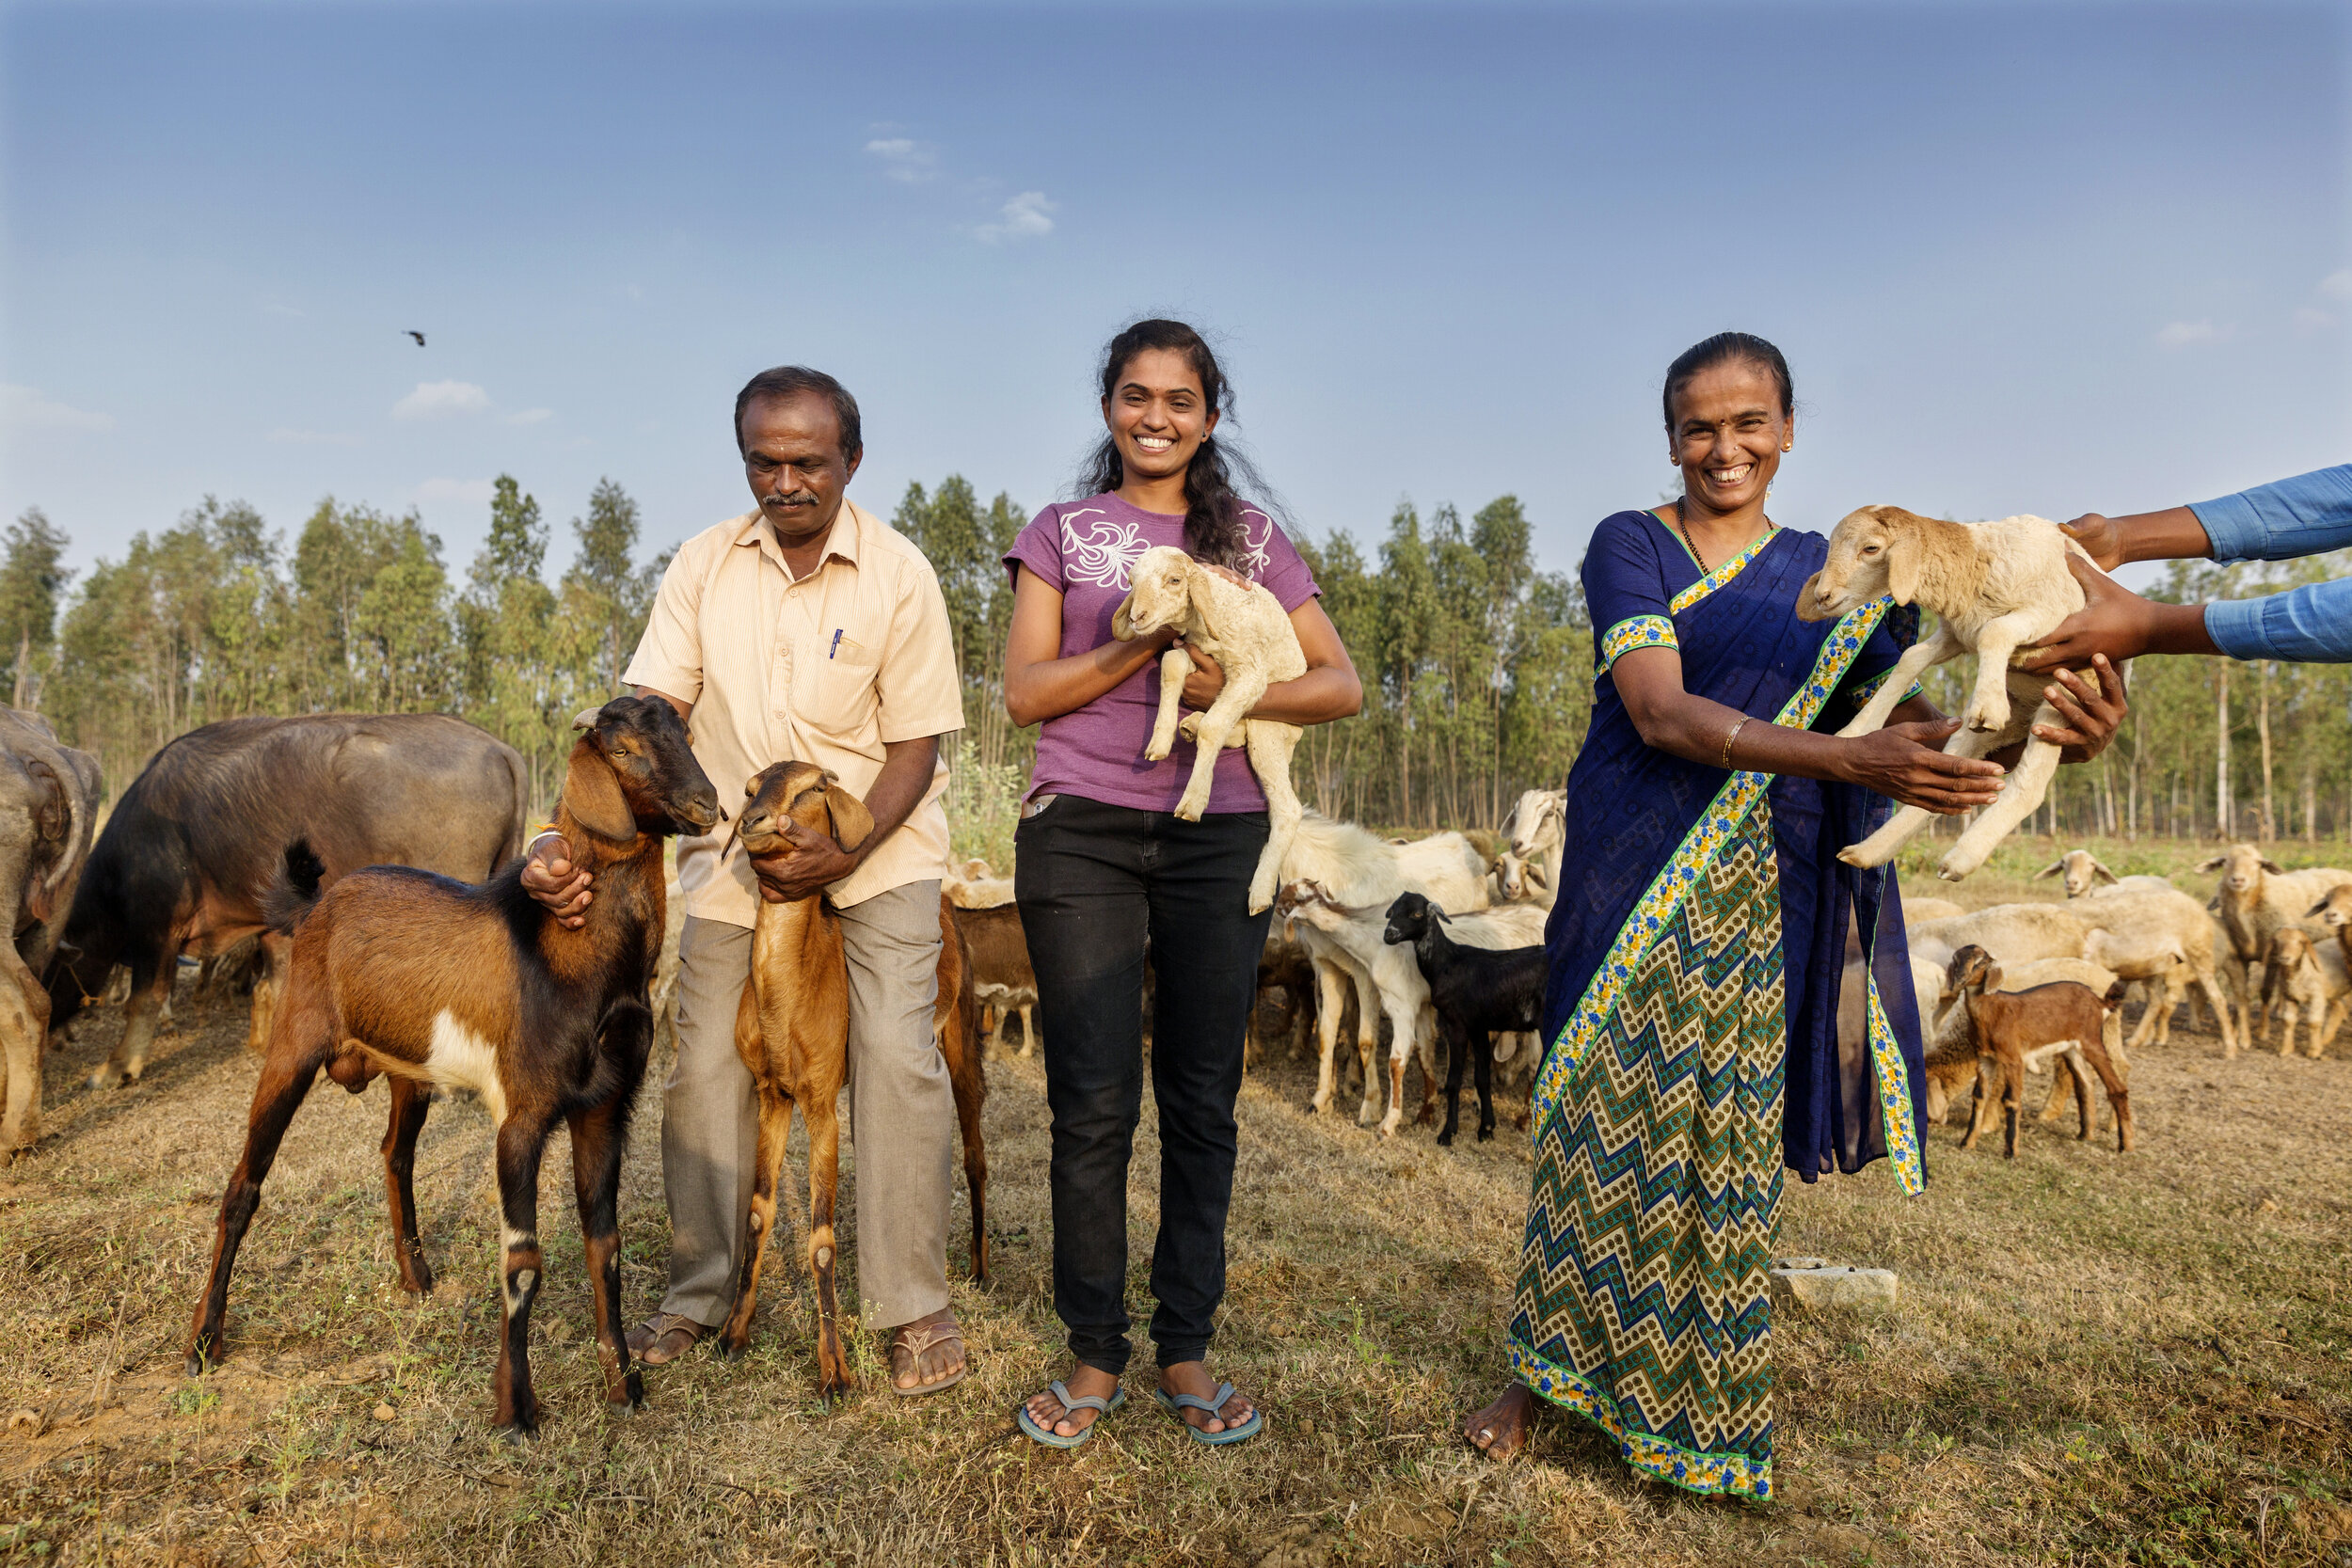  Aruna and her parents on the family's farmland. Aruna became the first person from the village to get a job and leave the traditional lifestyle. 